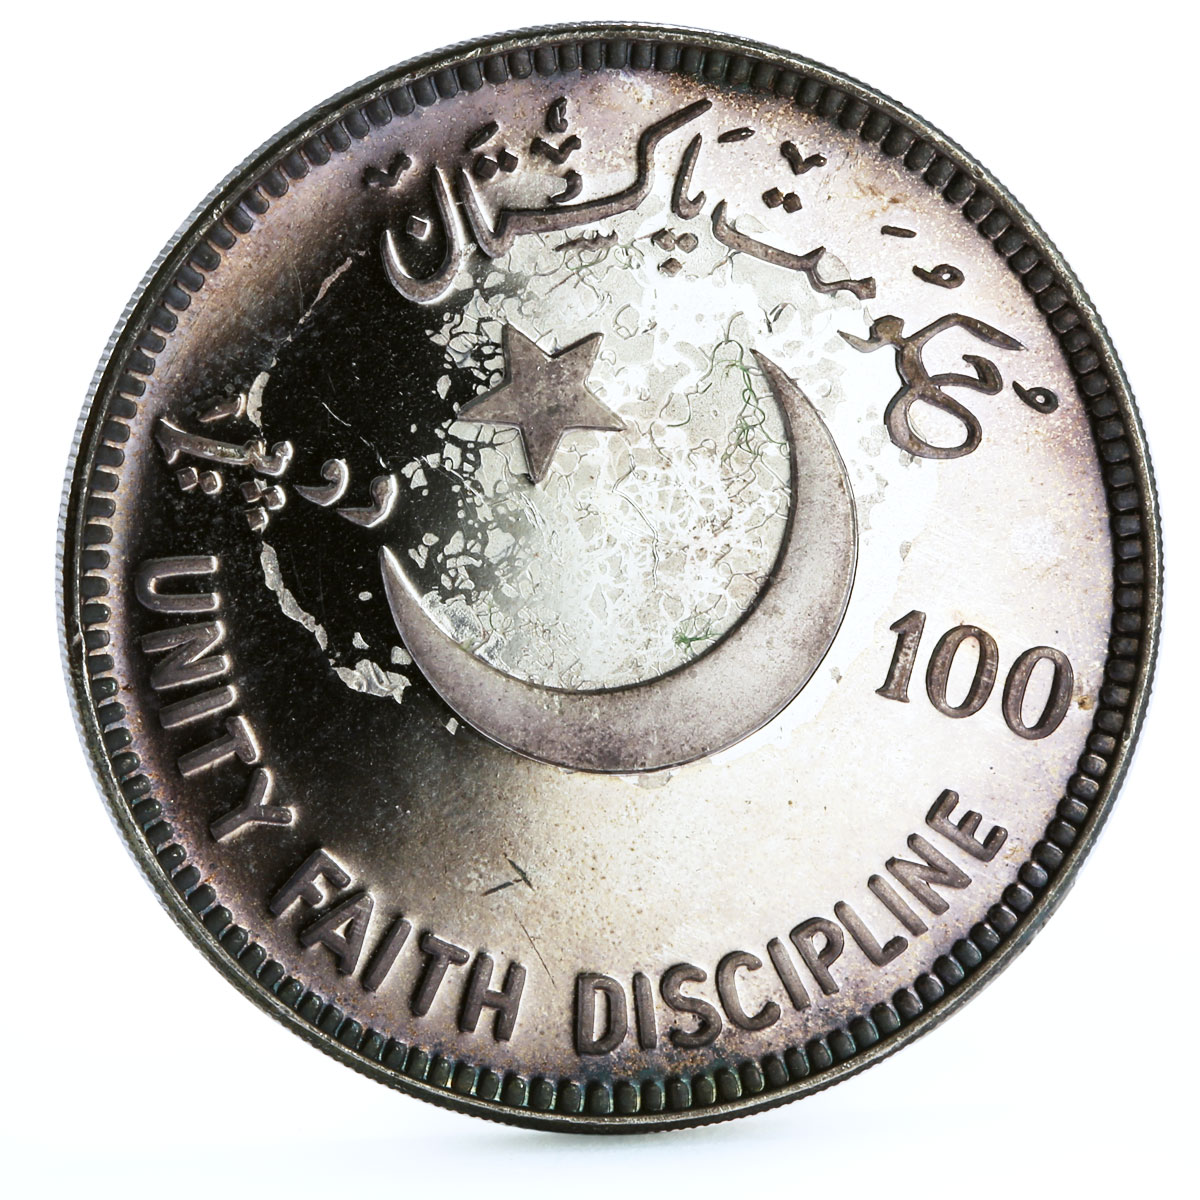 Pakistan 100 rupees Birth of Mohammed Ali Jinnah proof silver coin 1976